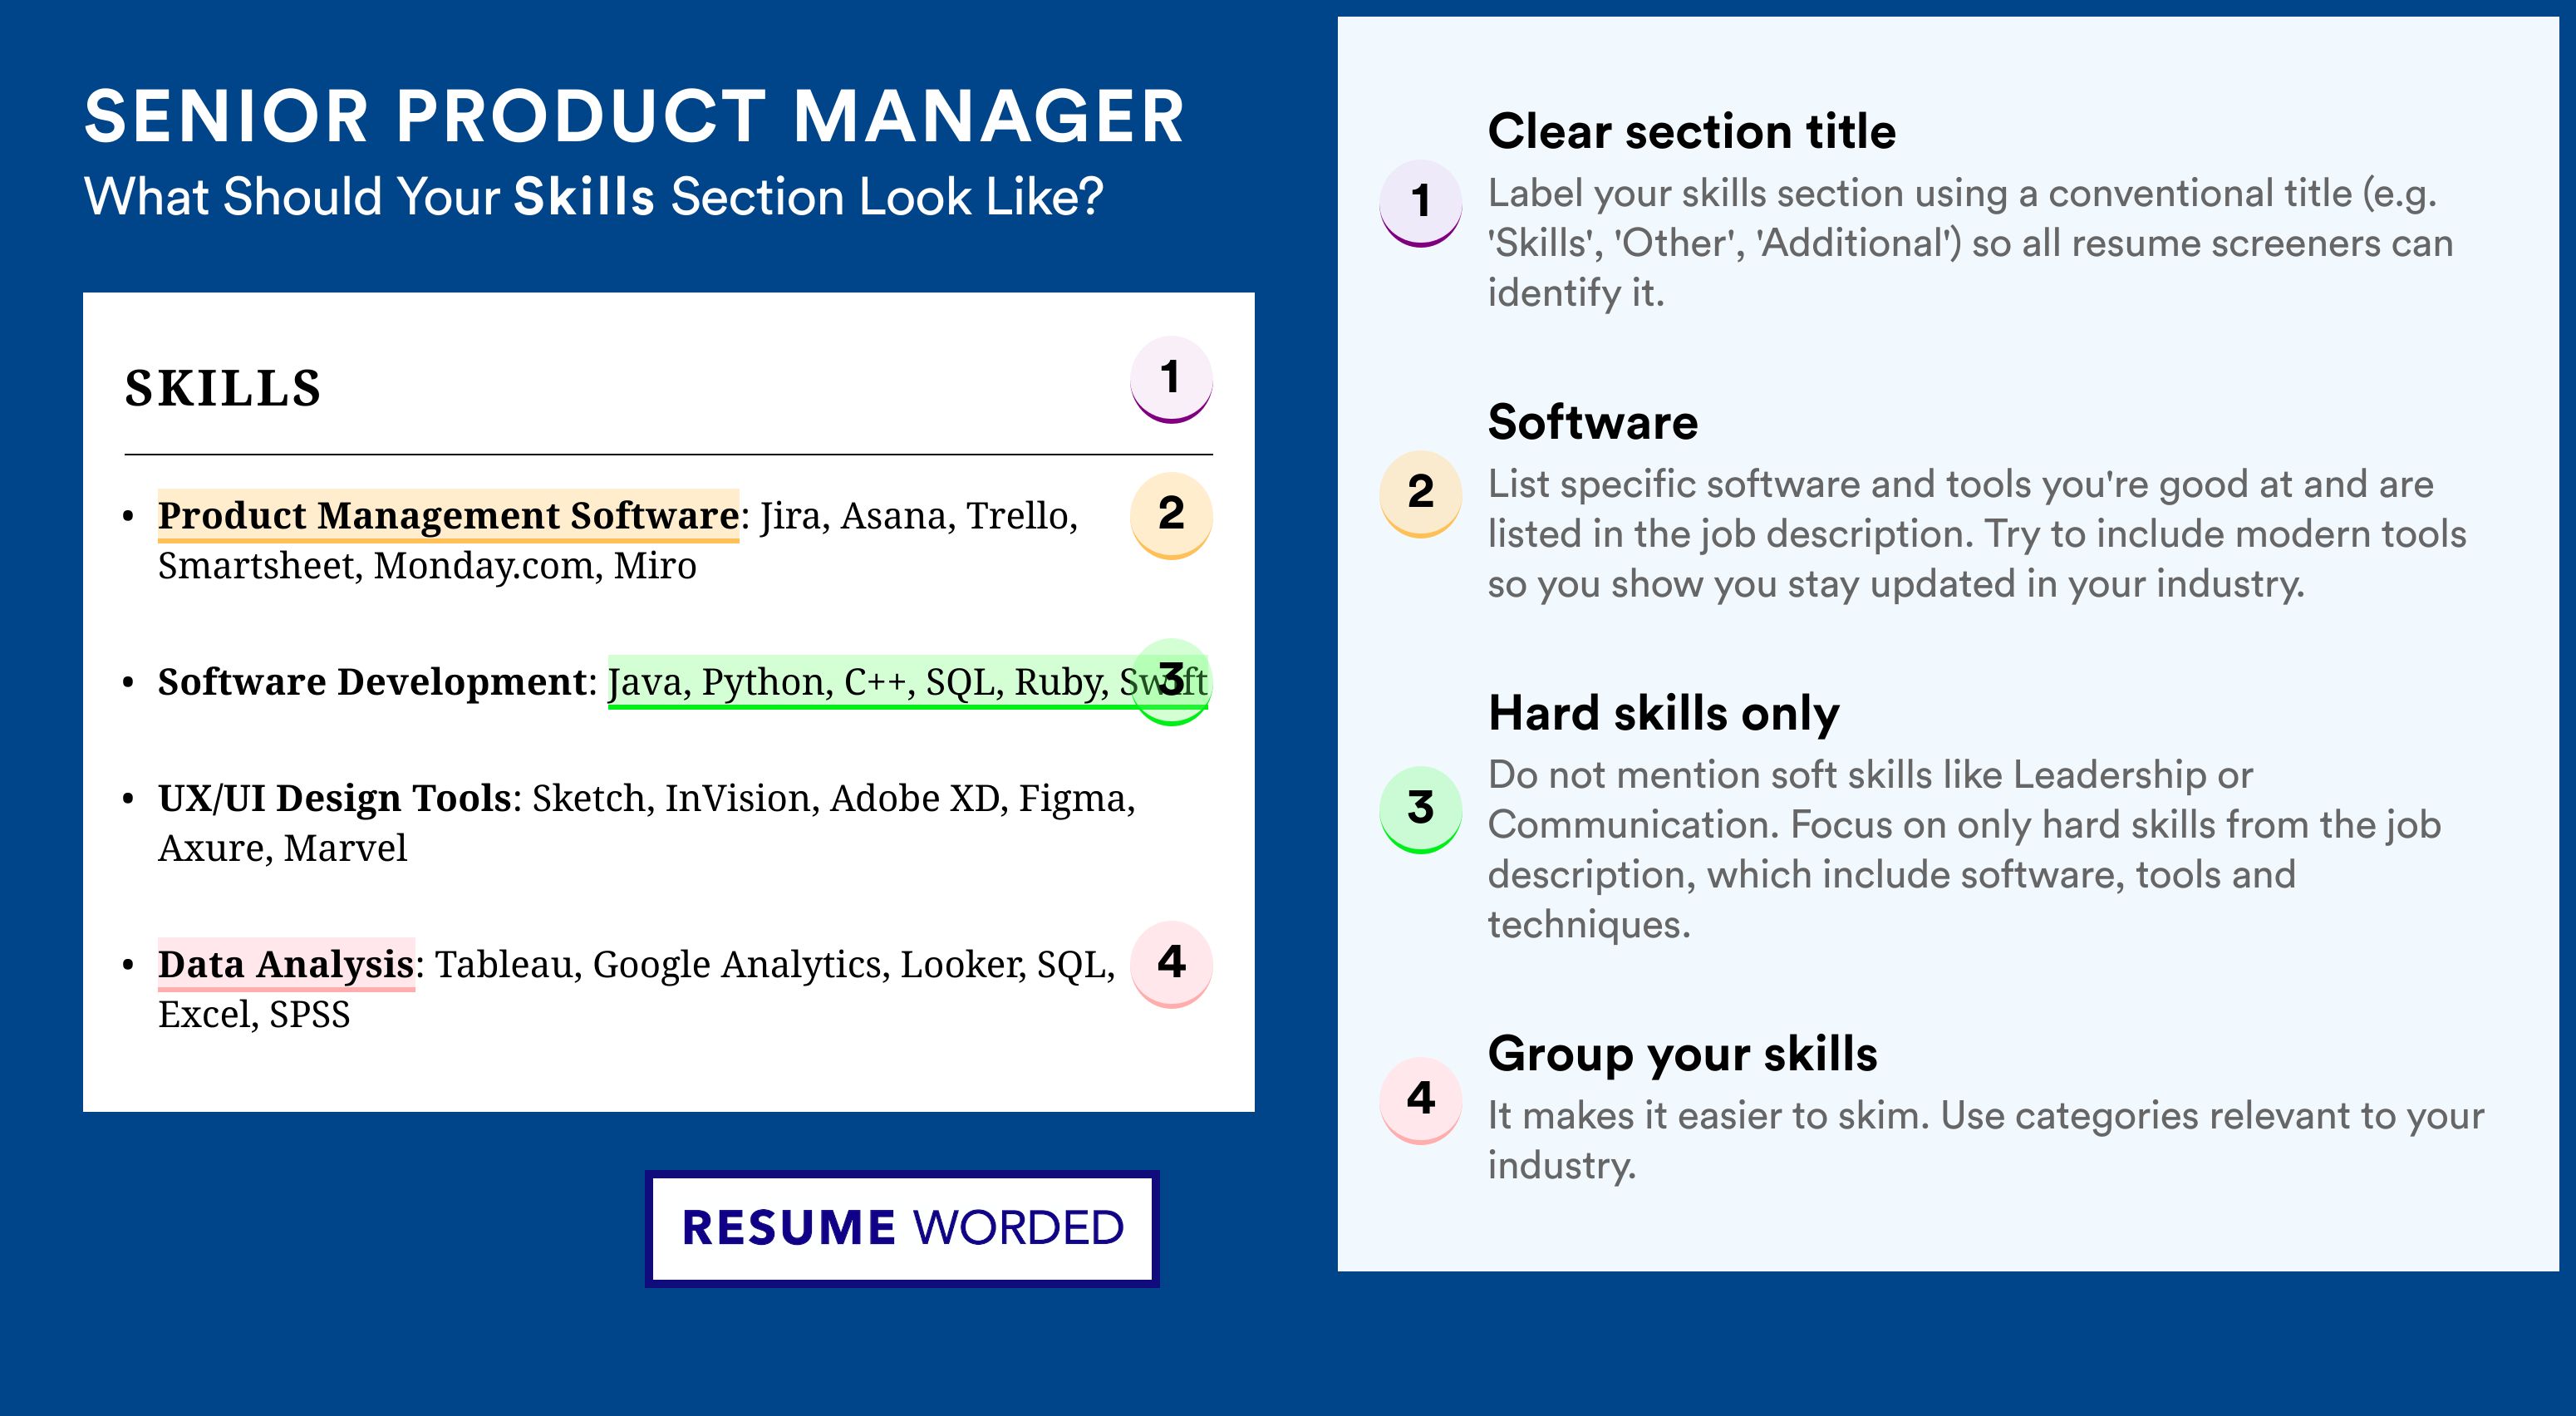 How To Write Your Skills Section - Senior Product Manager Roles